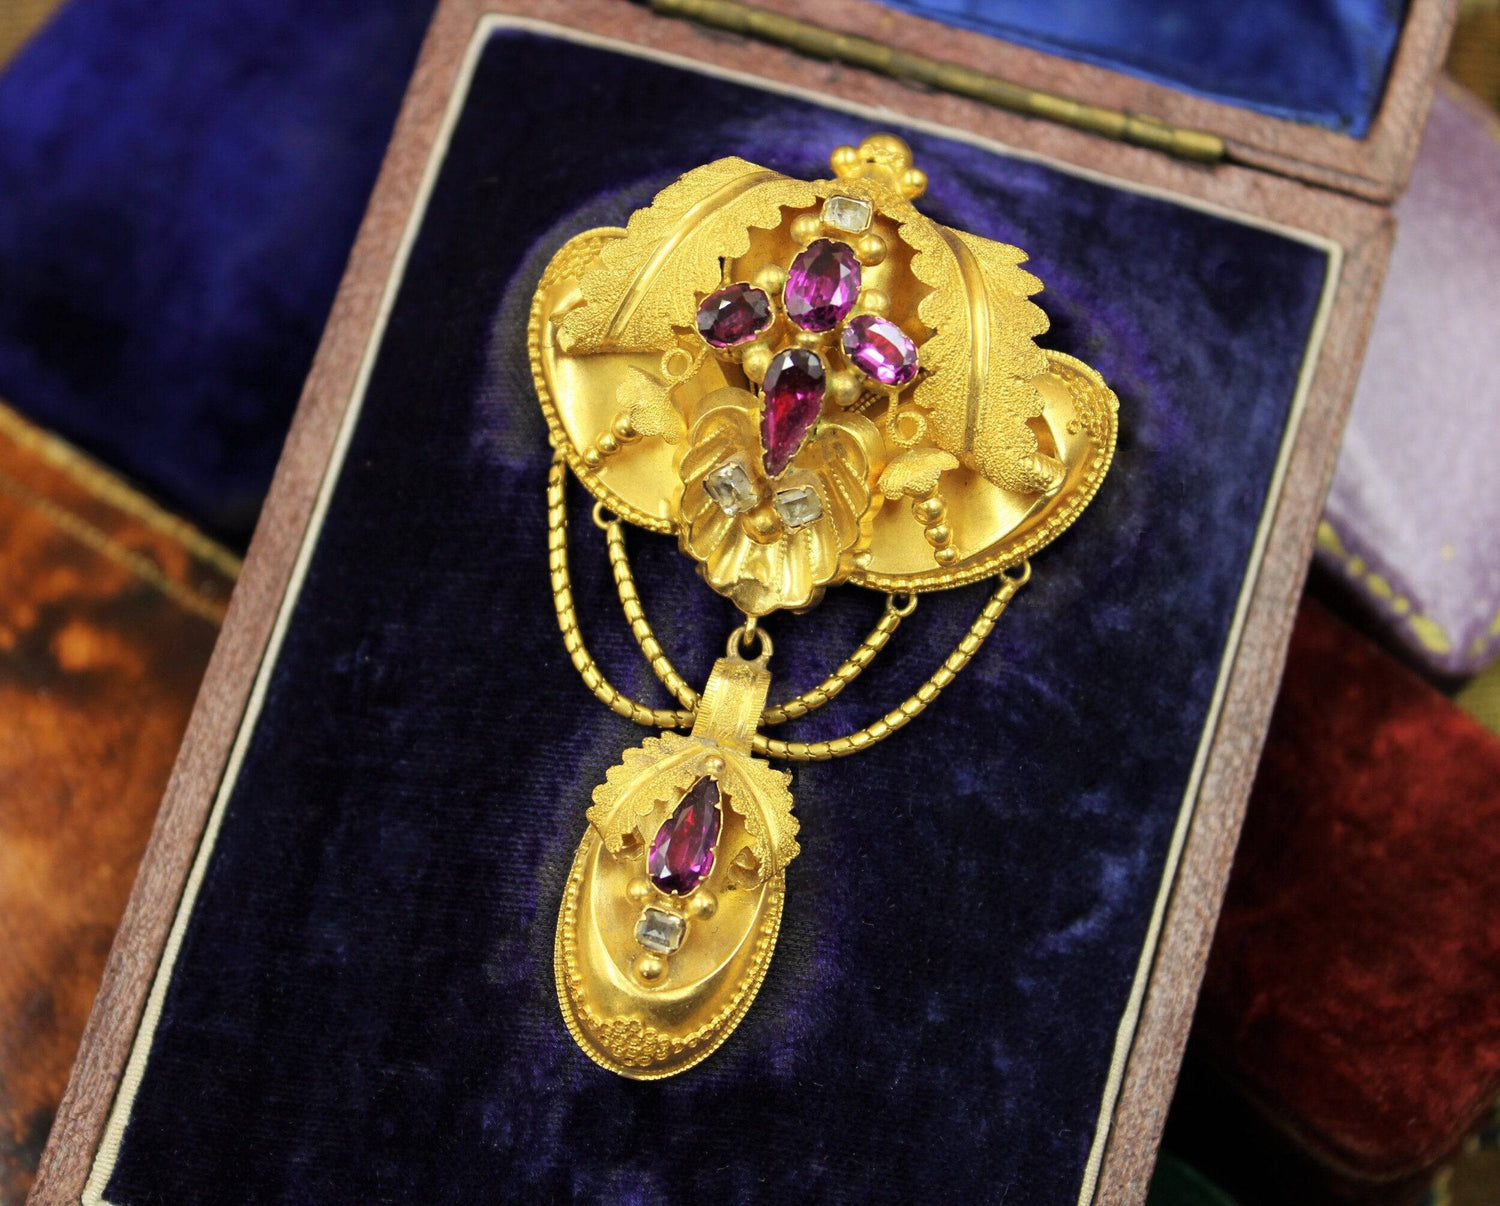 An extremely beautiful Victorian Almandine Garnet Pendant/Brooch mounted in 15ct Yellow Gold, English, Circa 1860 - Robin Haydock Antiques